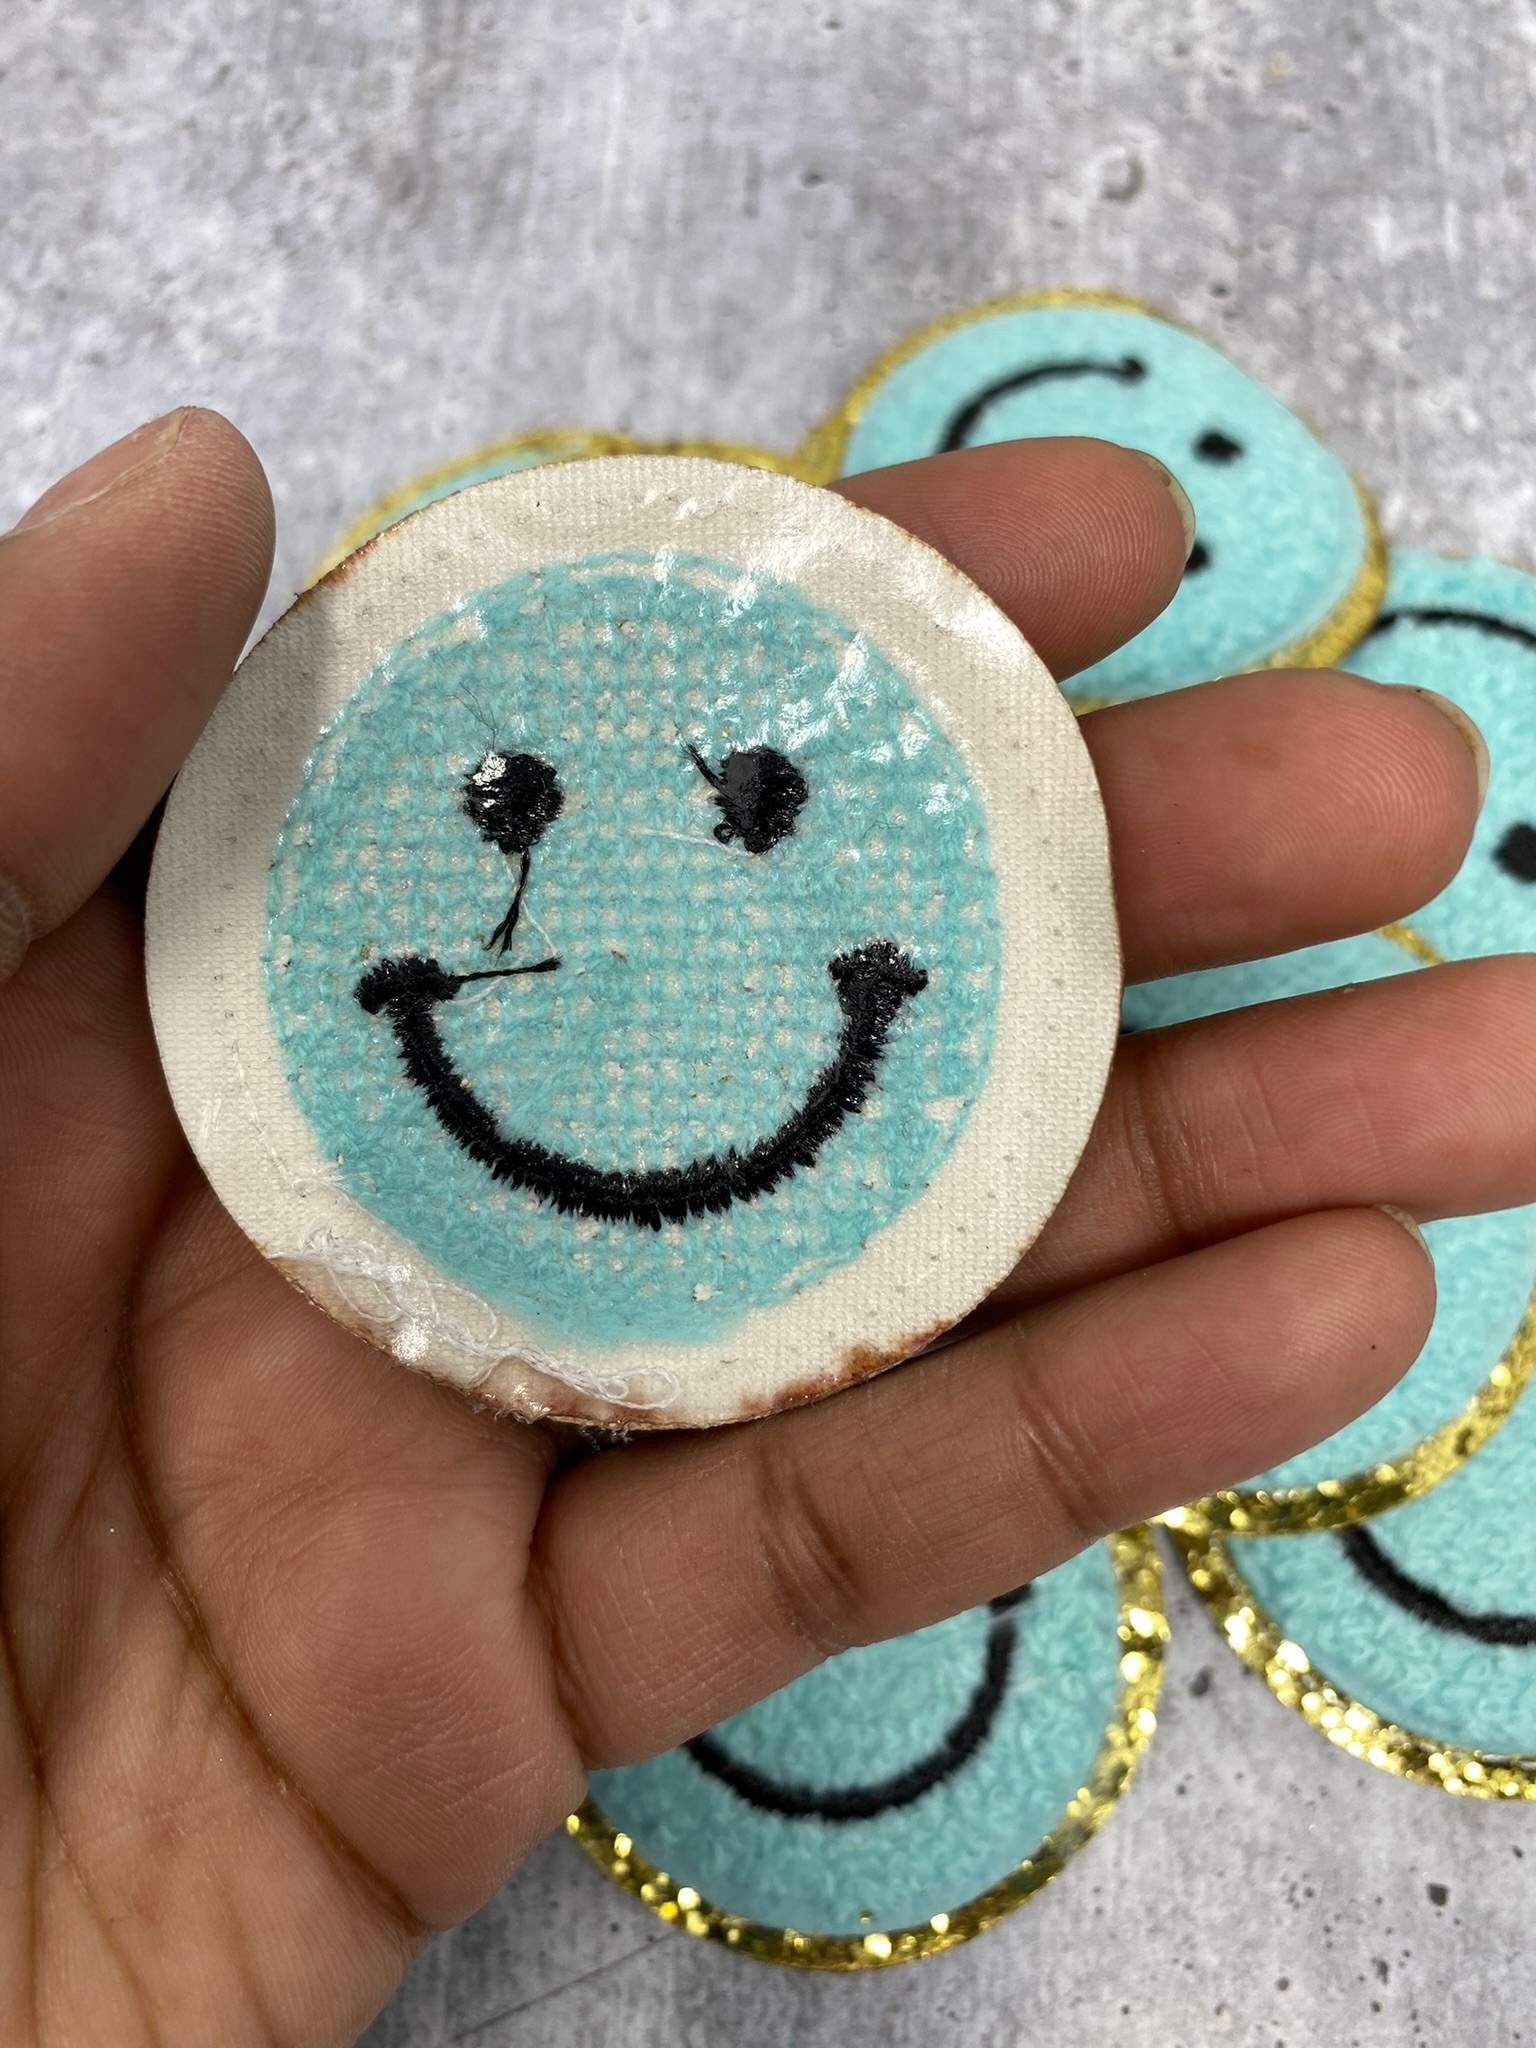 New: Aqua, Chenille "Smile Patch" w/ Gold Glitter, Size 2.5", Smiley Face Patch with Iron-on Backing, Fuzzy Happy Face Applique, Fun Patch